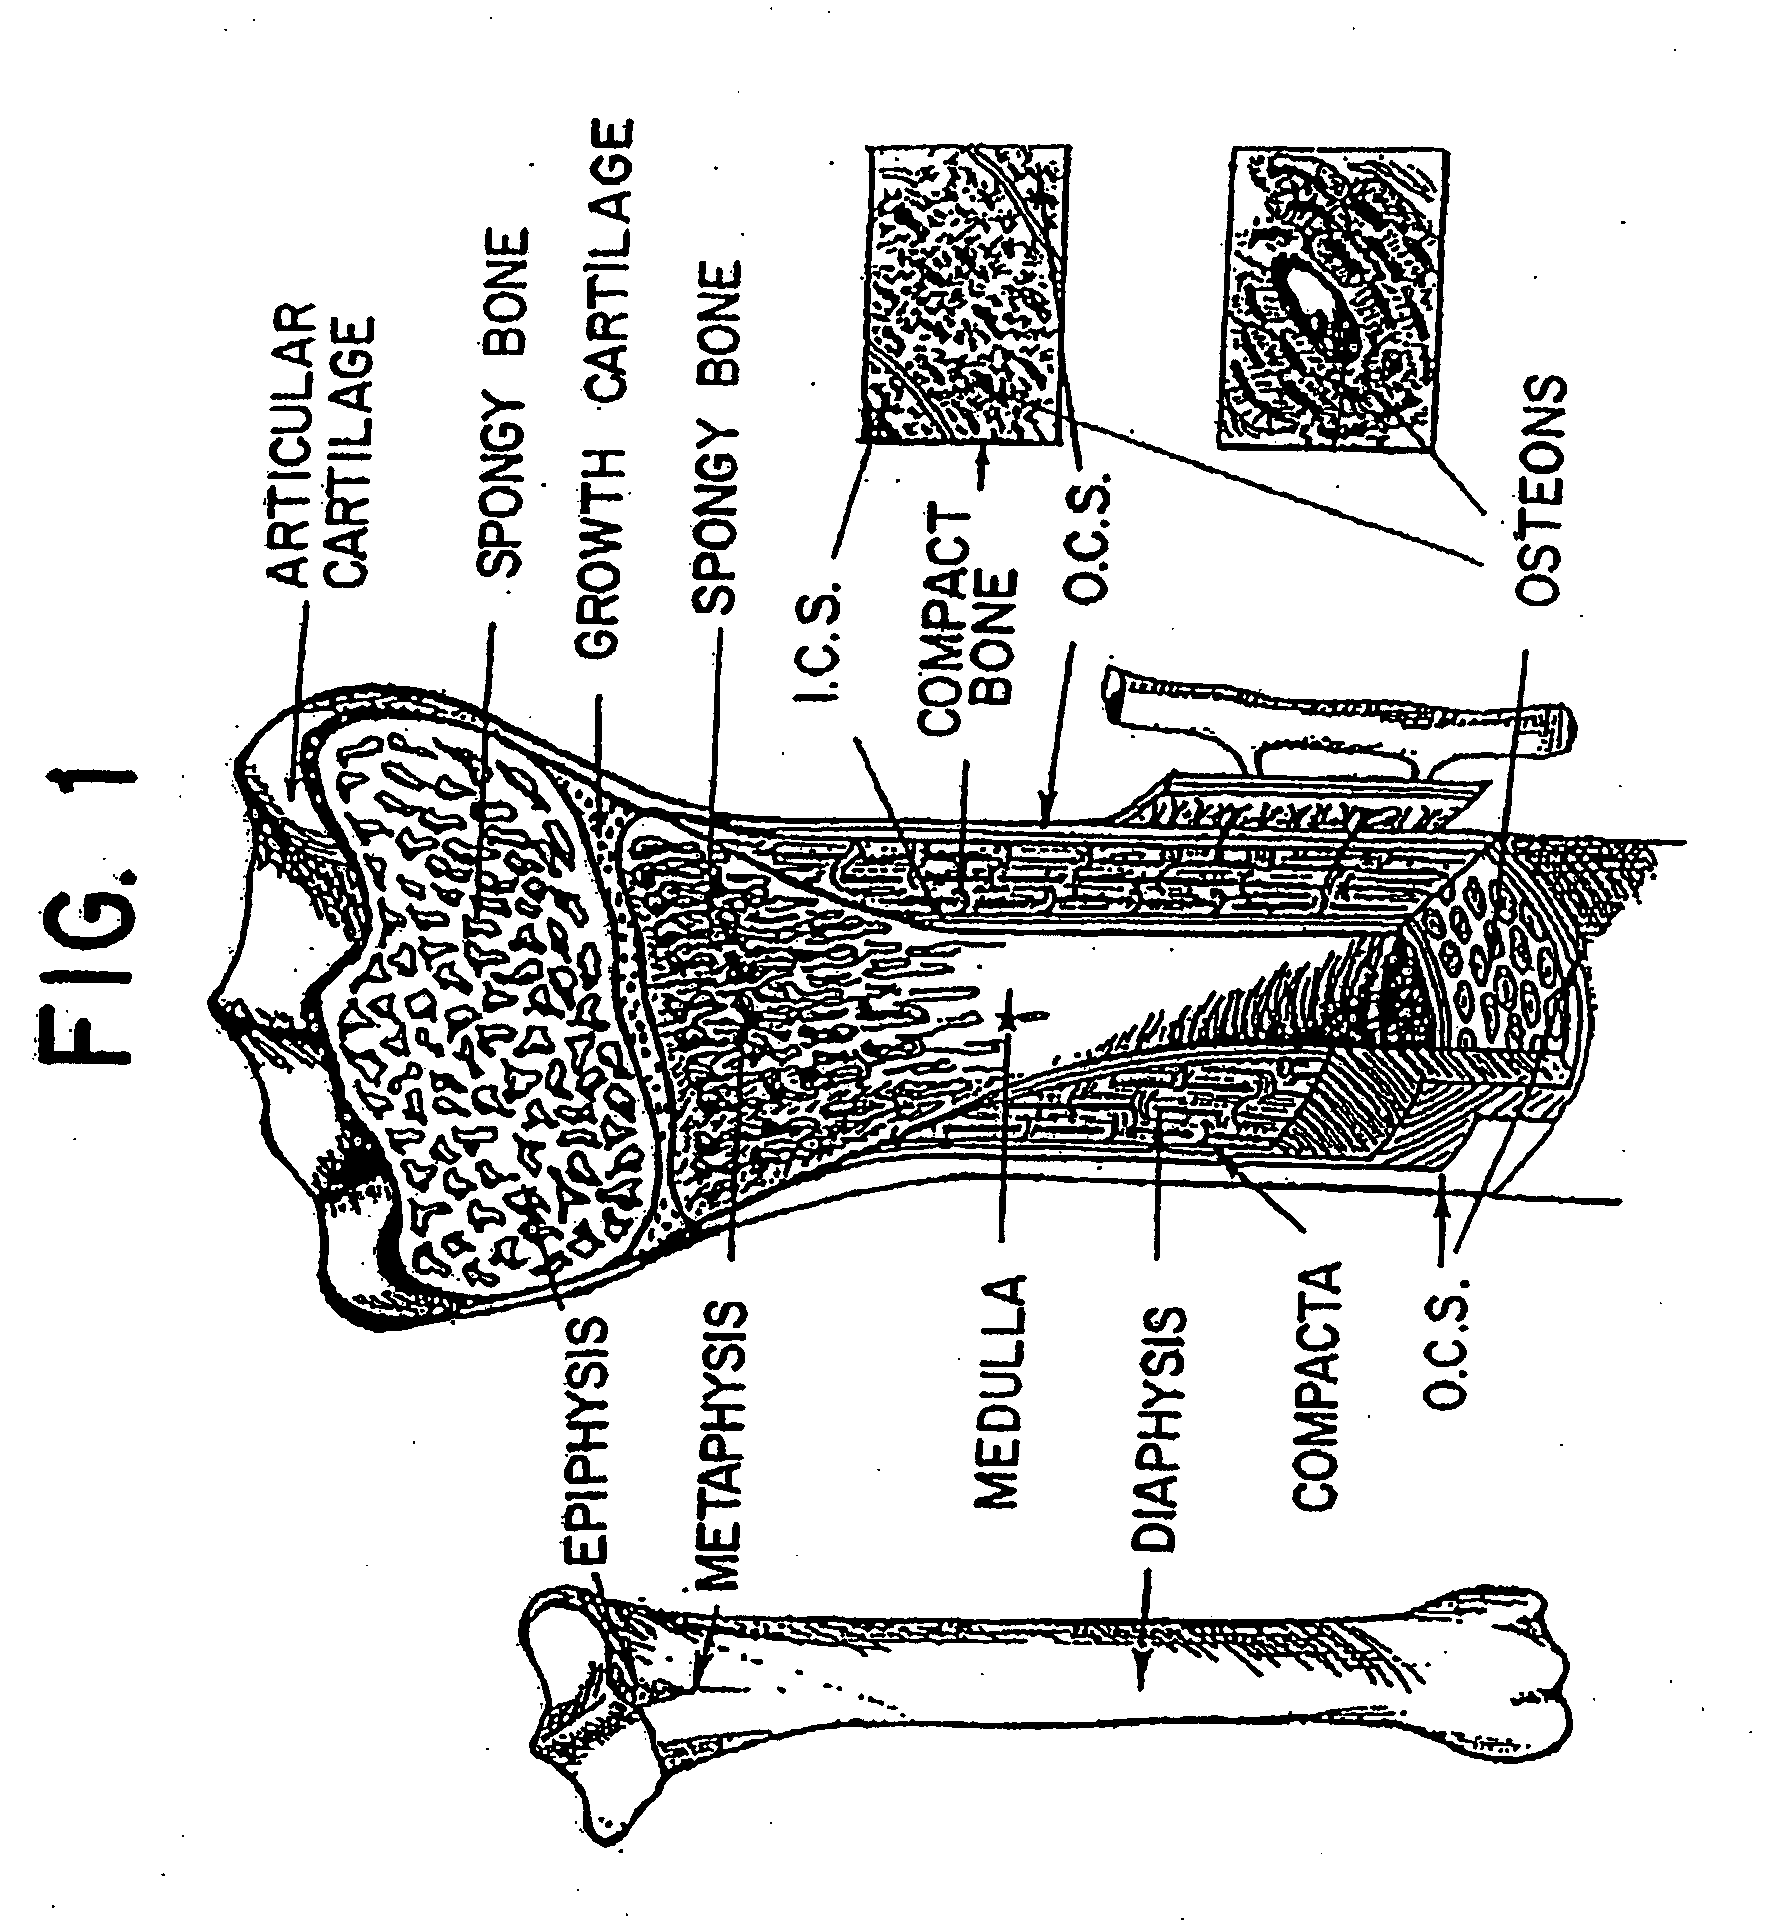 Method and system for modelling bone structure